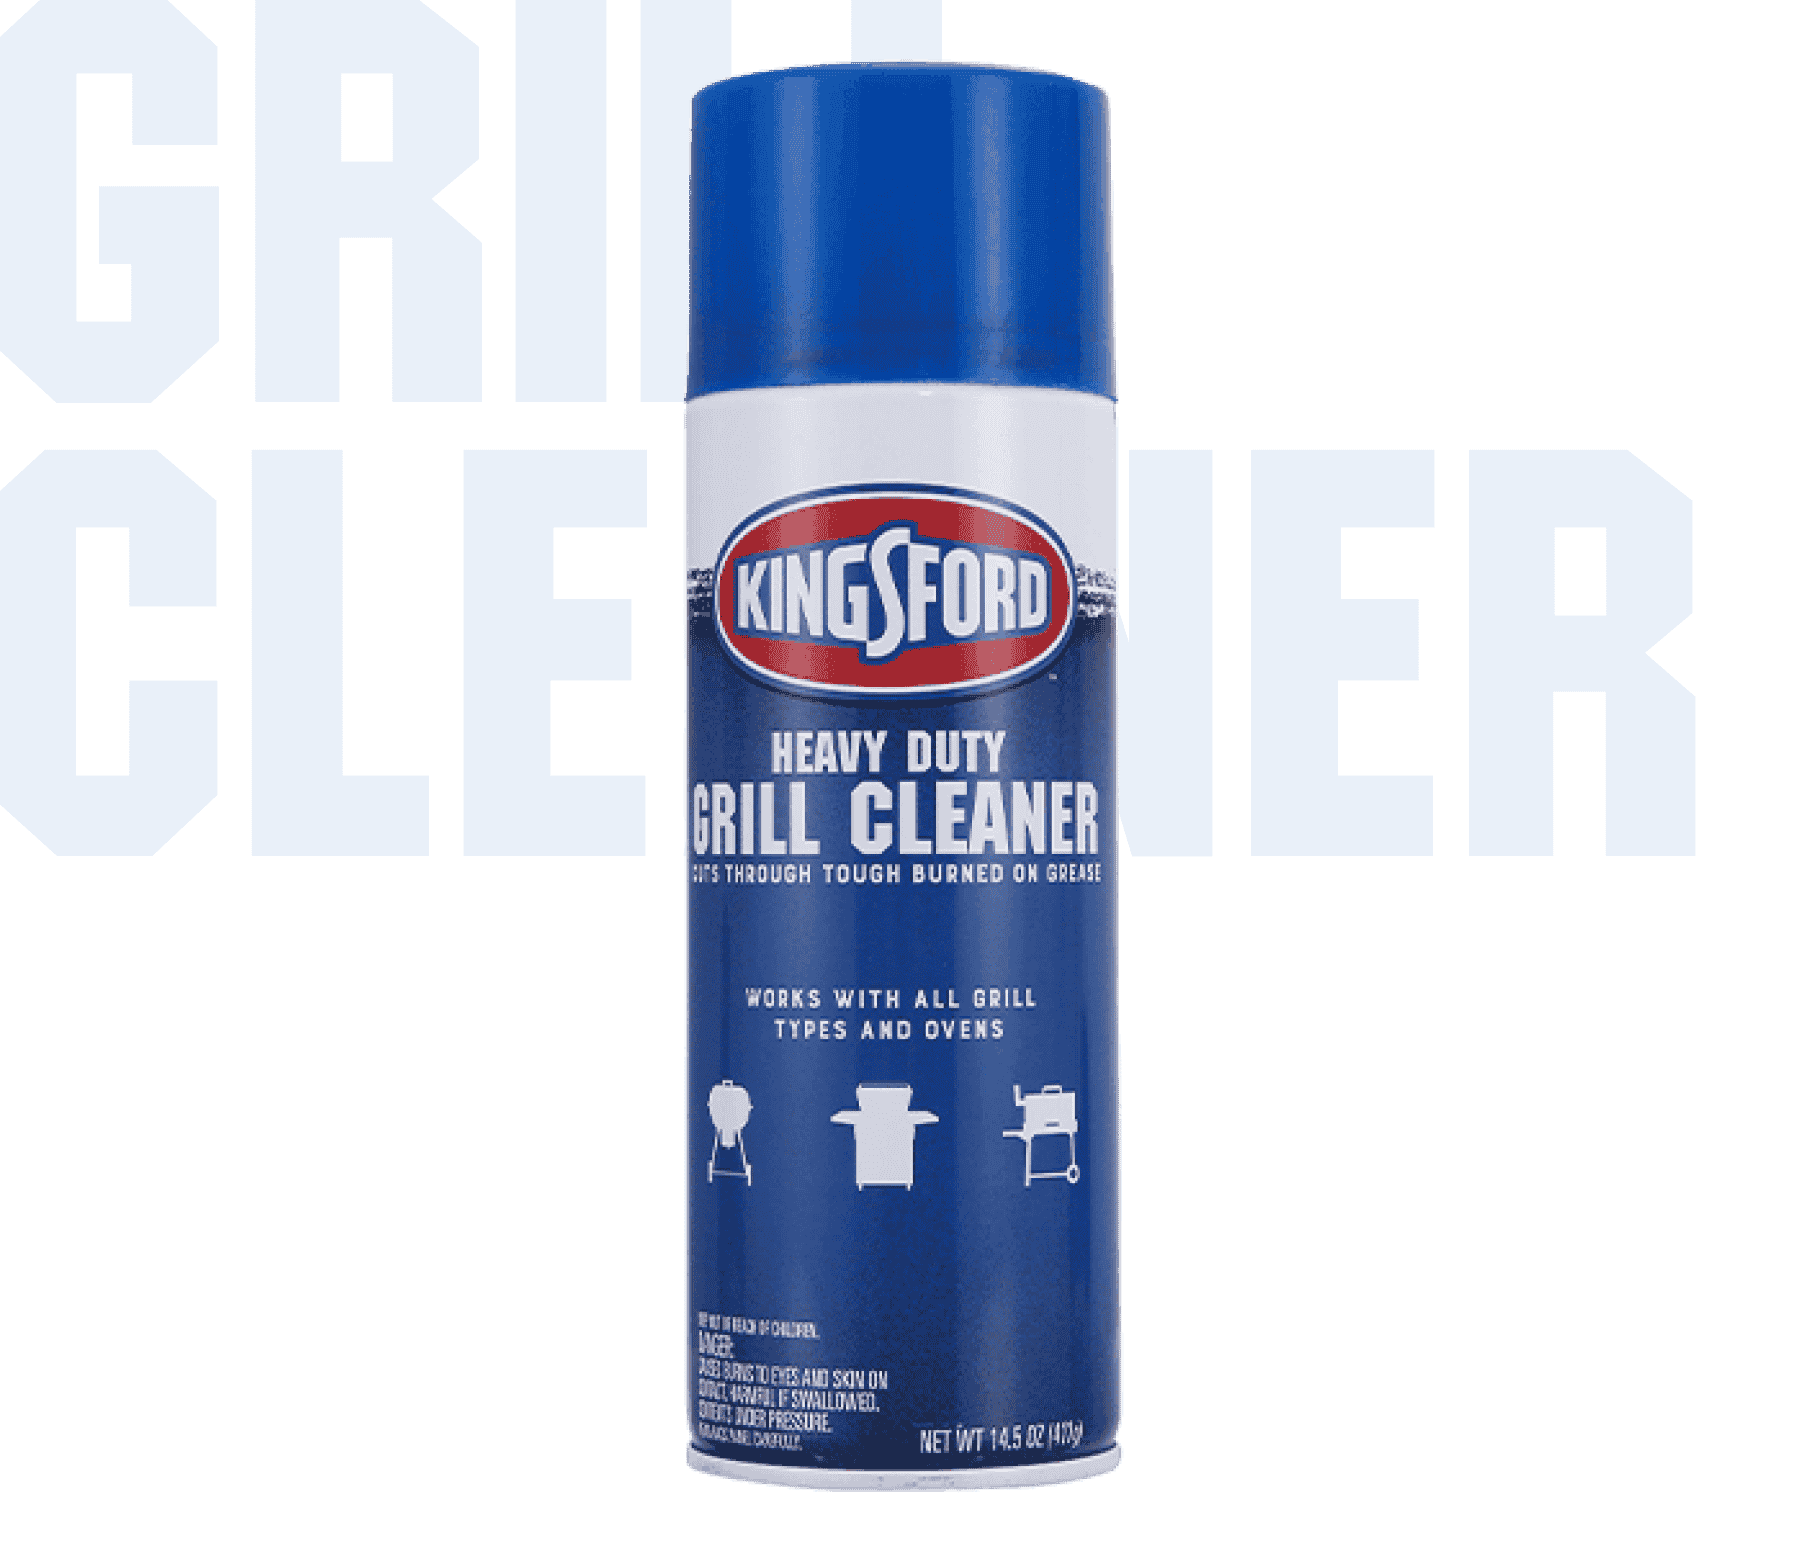 https://www.kingsford.com/wp-content/uploads/2019/05/acc-grill-cleaner-972x772@2x.png?quality=50